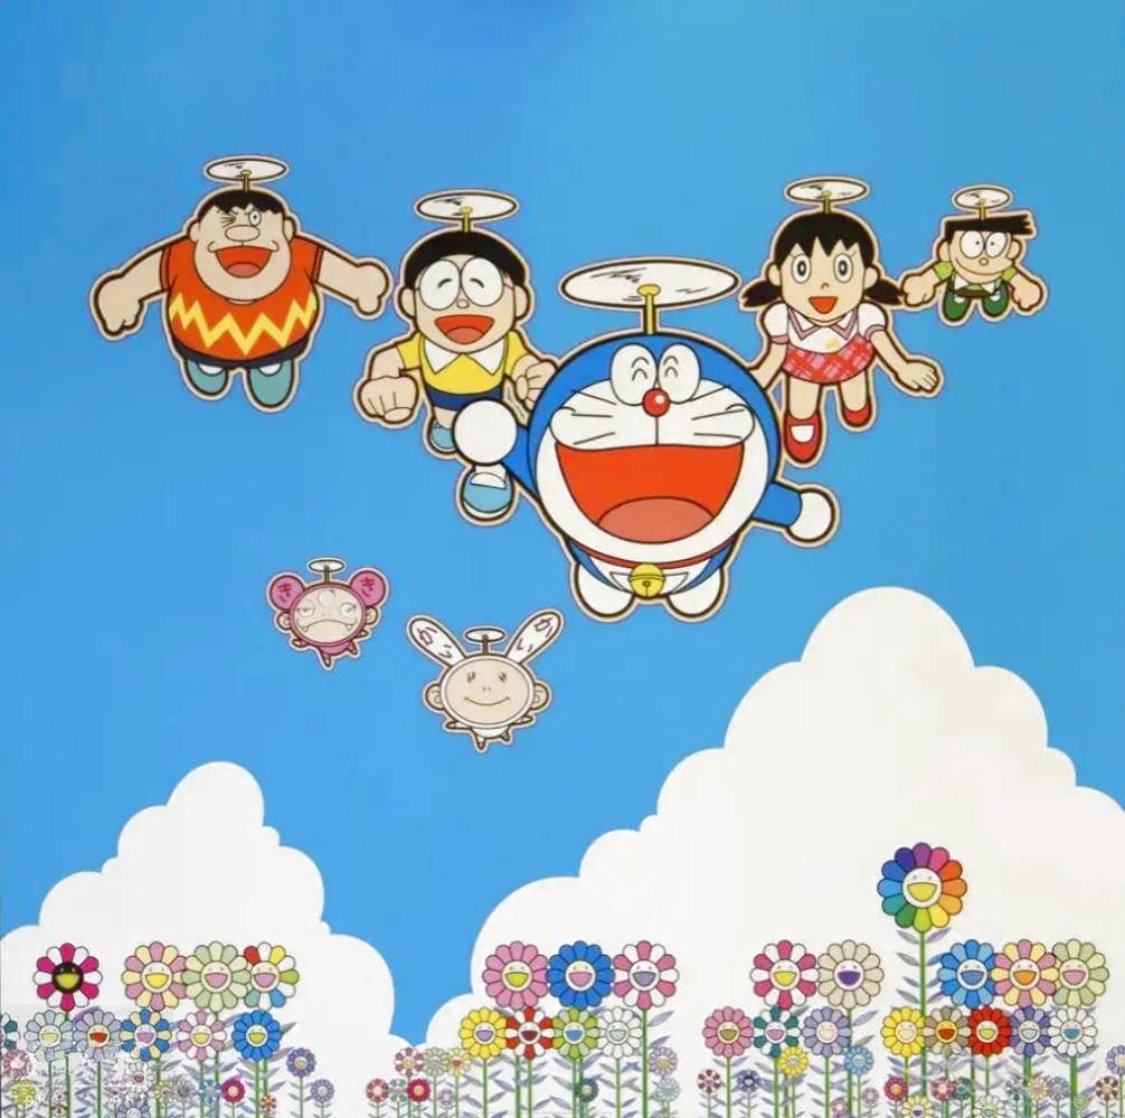 Wouldn’t it Be Nice if We Could Do This and That 2020 Limited Edition Print by Takashi Murakami